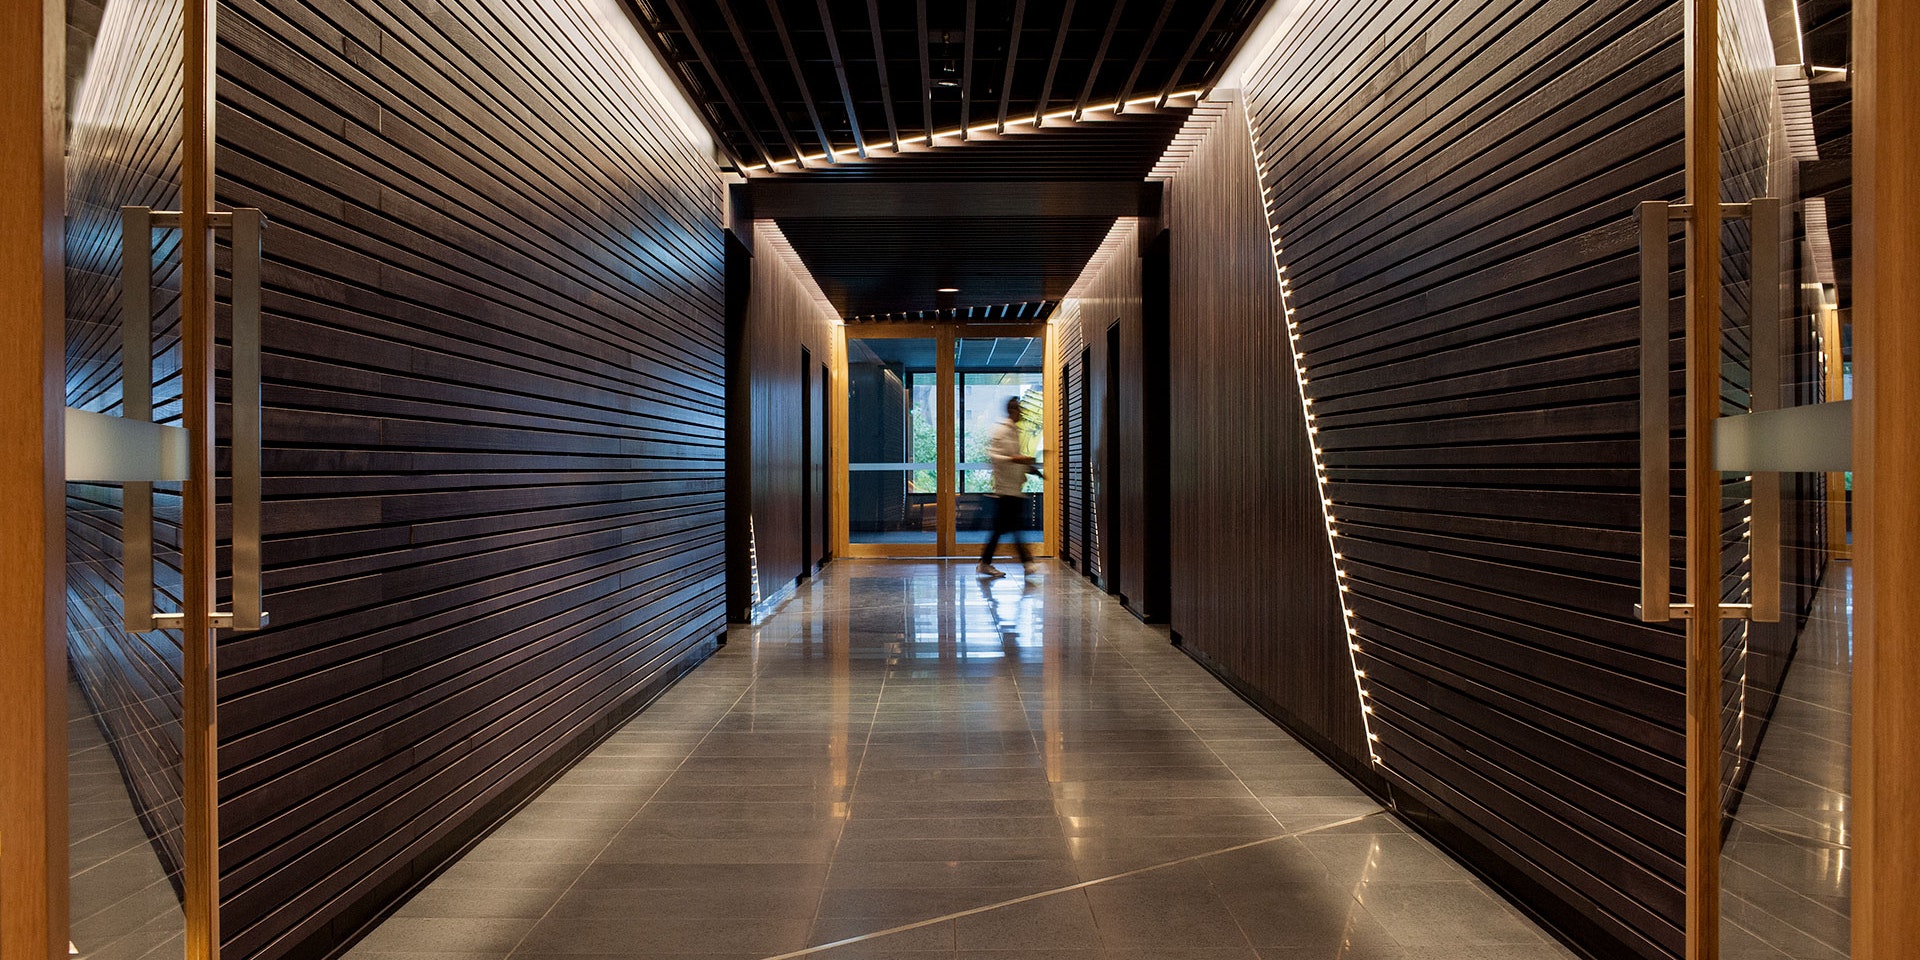 Aris LED linear floodlight in application, installed in 530 Collins Street Lobby. Architectural LED lighting